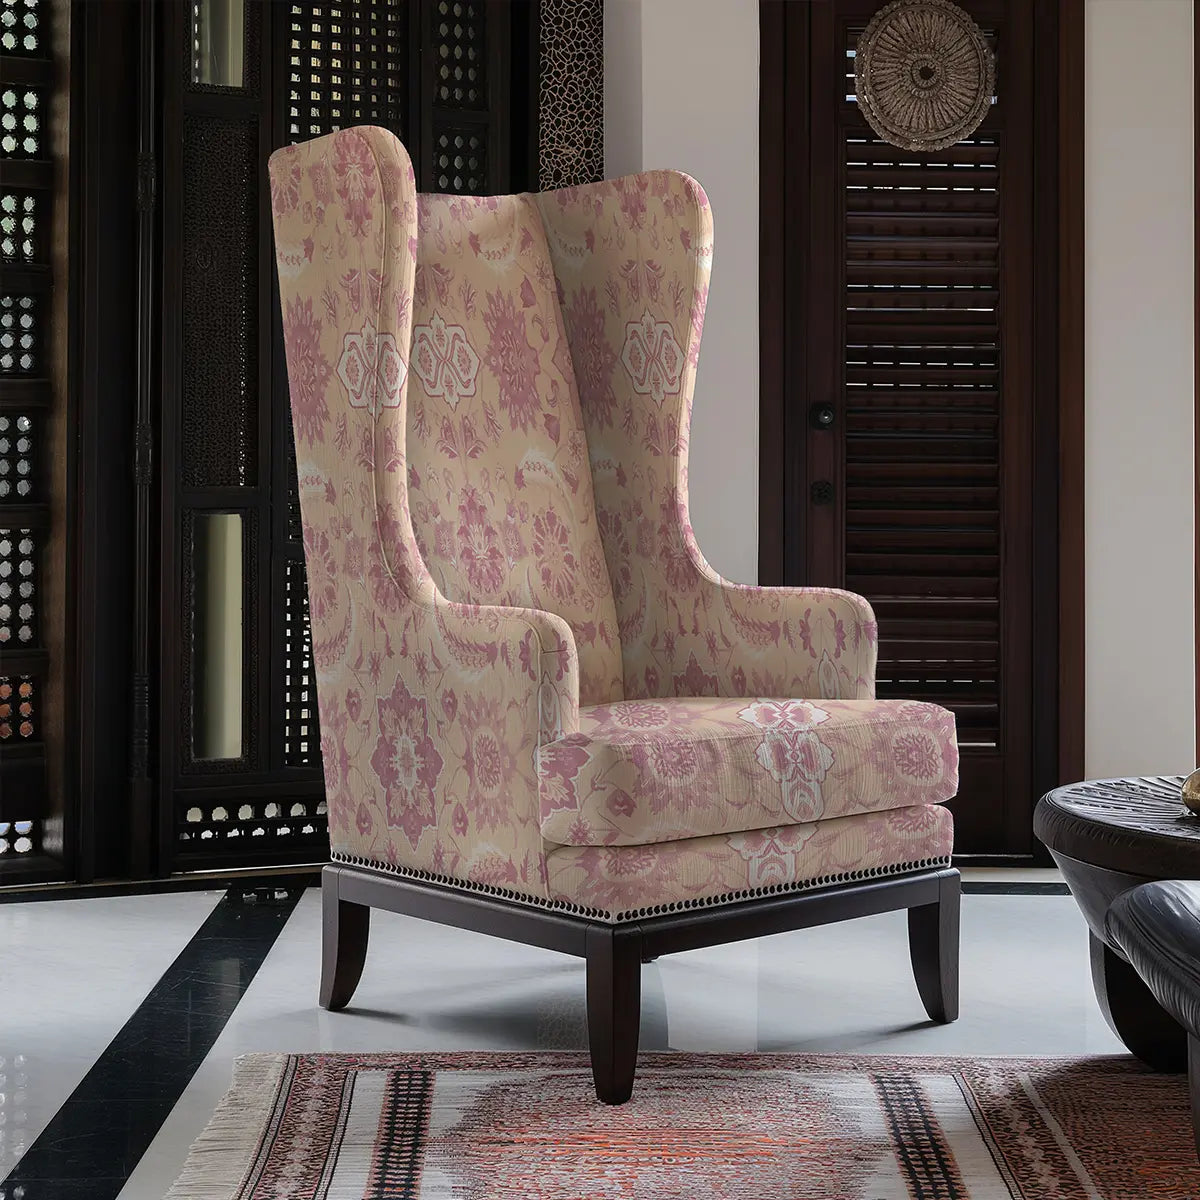 Shop now Khumar Sofa and Chairs Upholstery Fabric pink